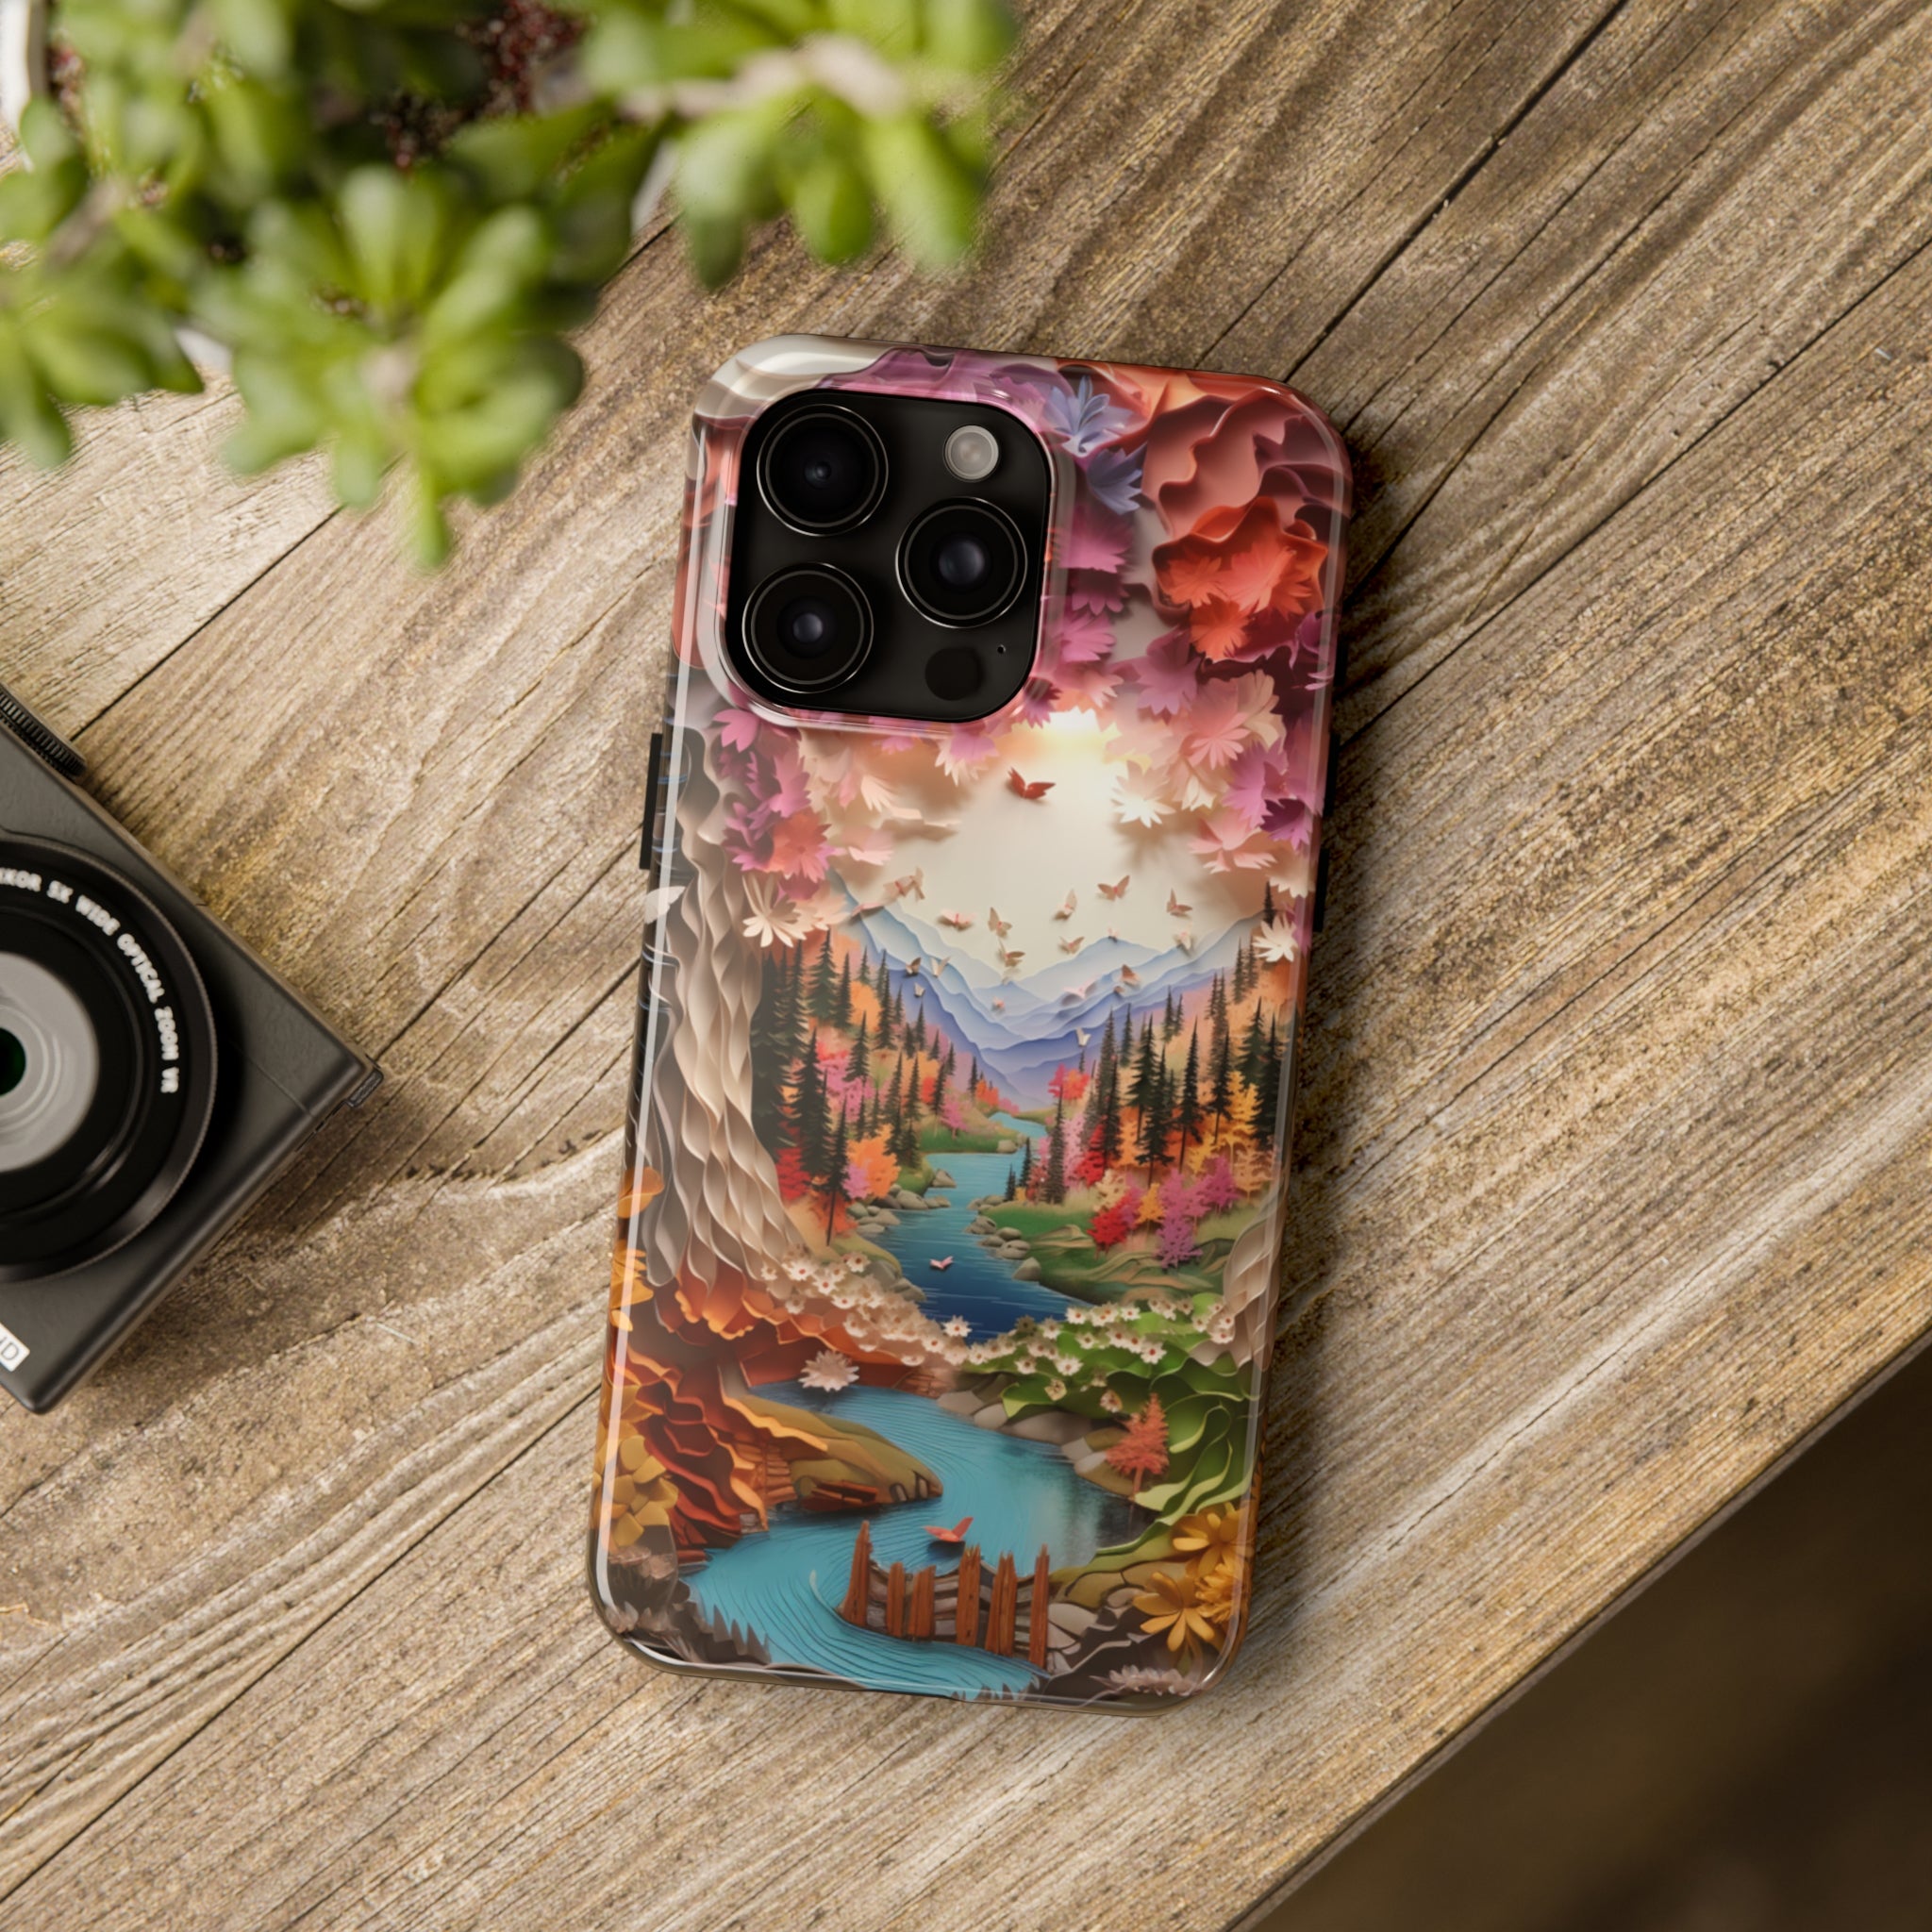 Wilderness Beauty - Tough Phone Cases